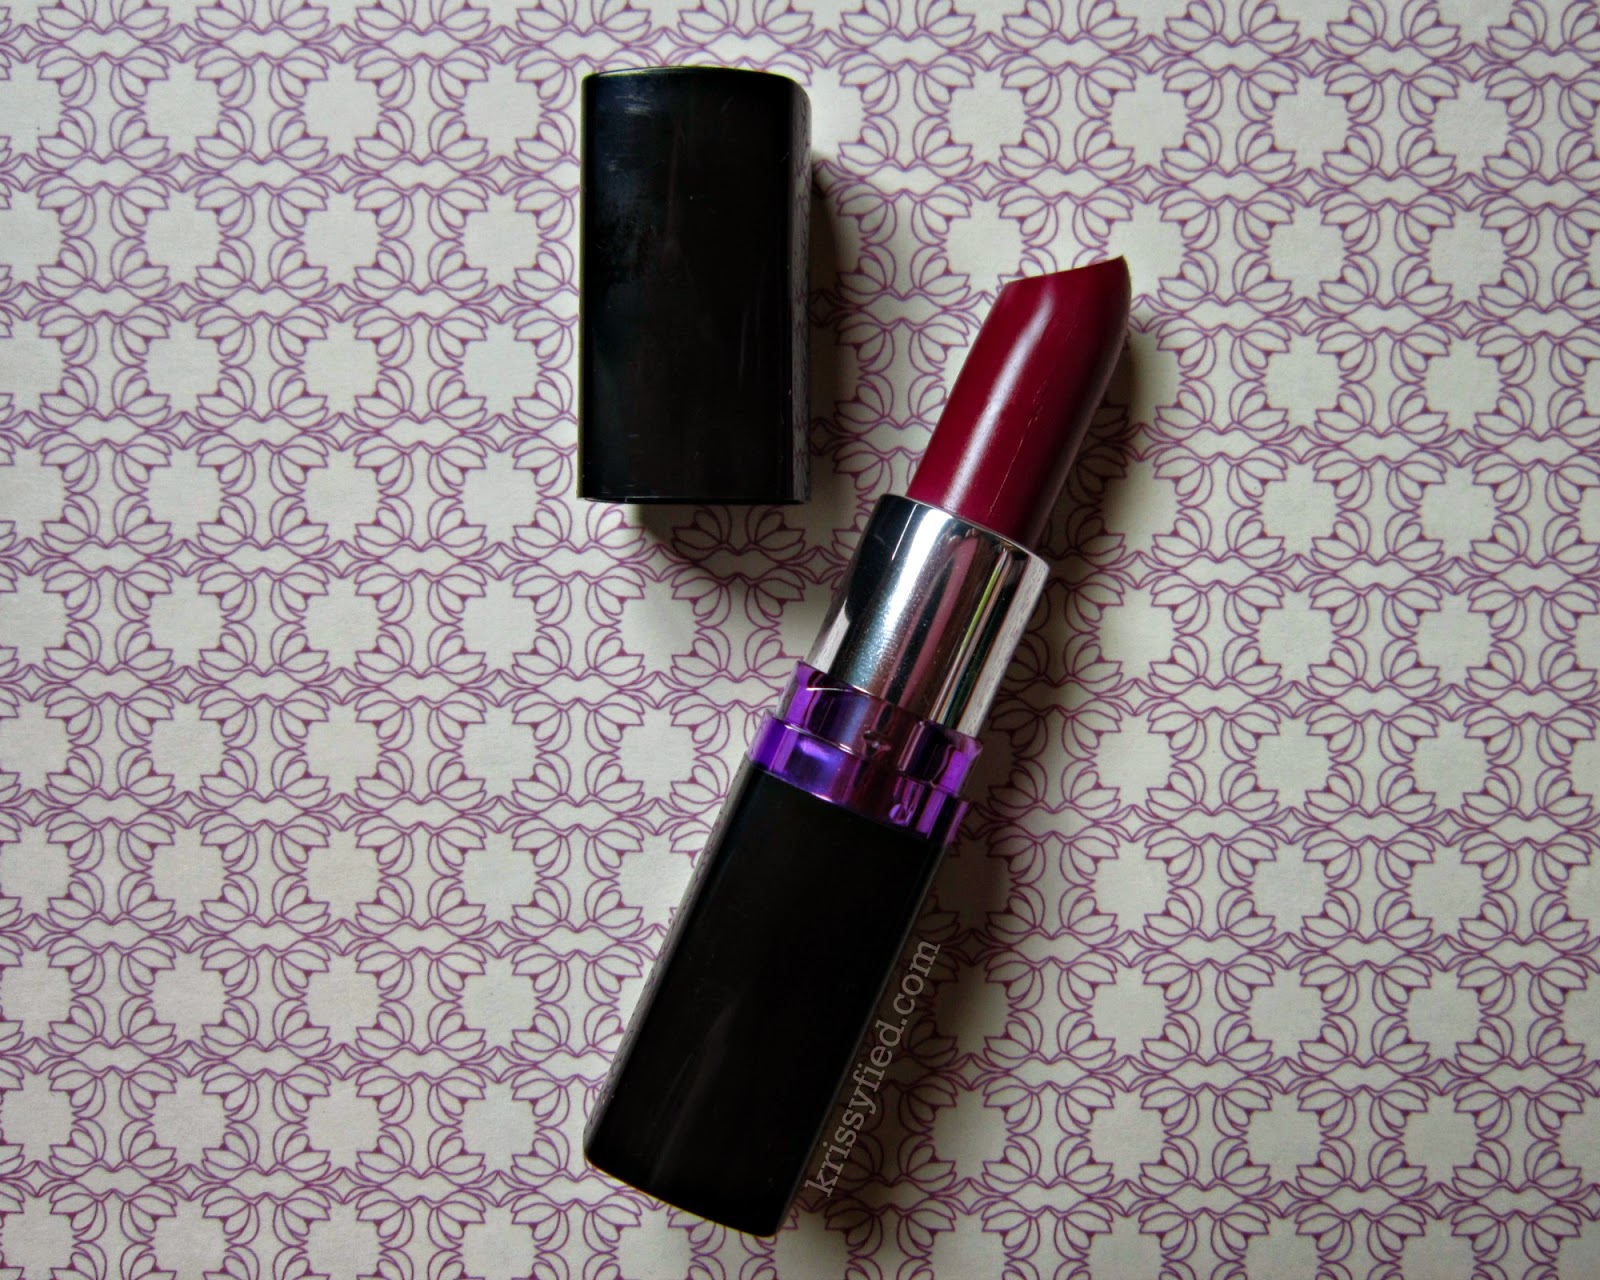 Review: Maybelline Color Show Lipstick in Plum Perfect.